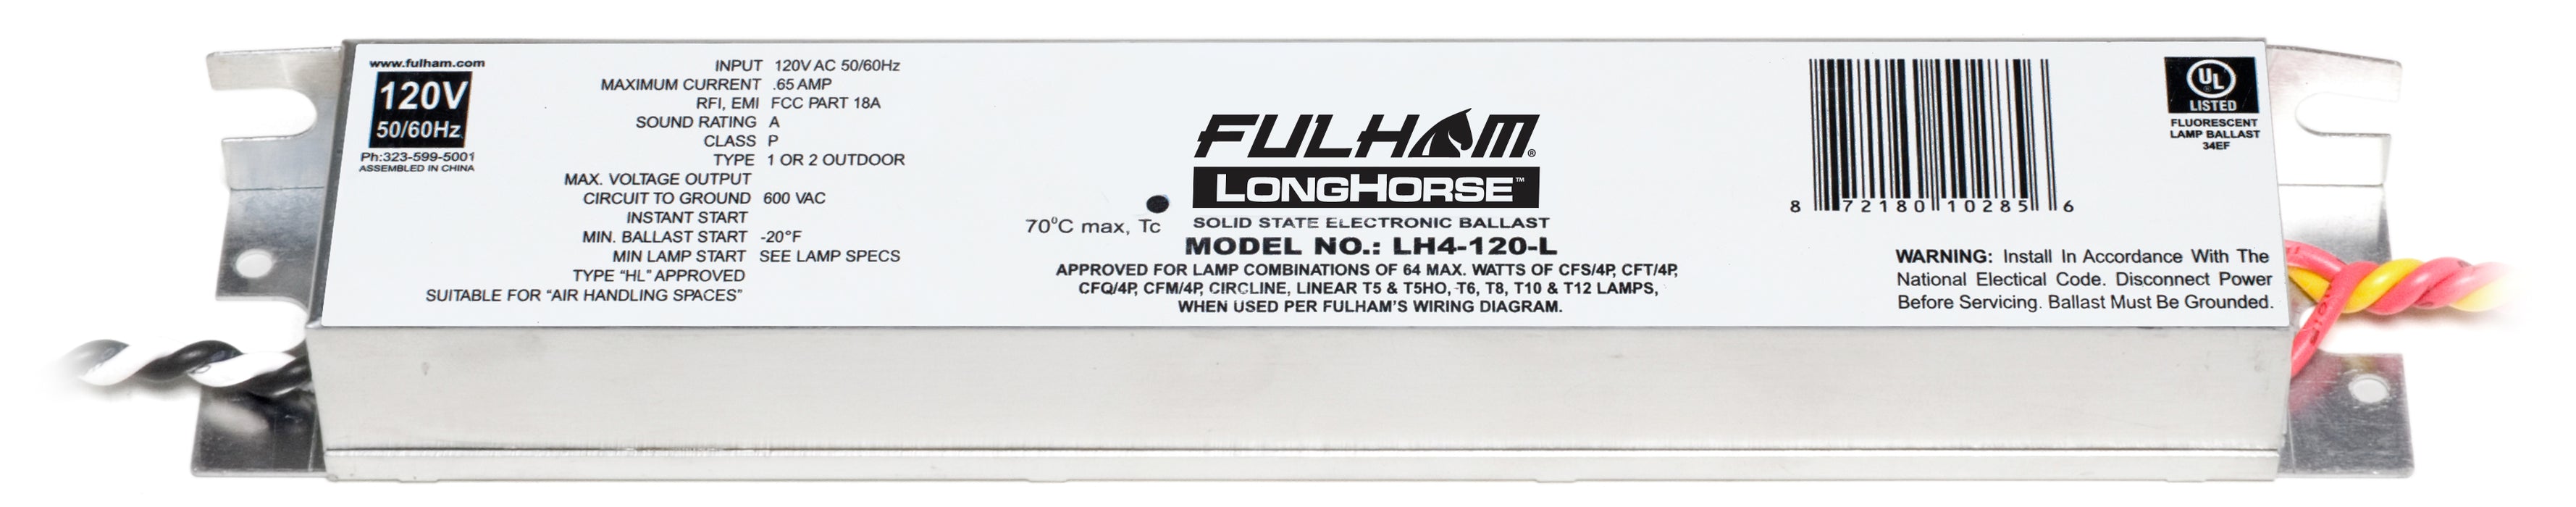 Fulham Instant Start Electronic Fluorescent Remote Mount Longhorse Ballast For Up To 70W Maximum Run At 120V (LH4-120-L)